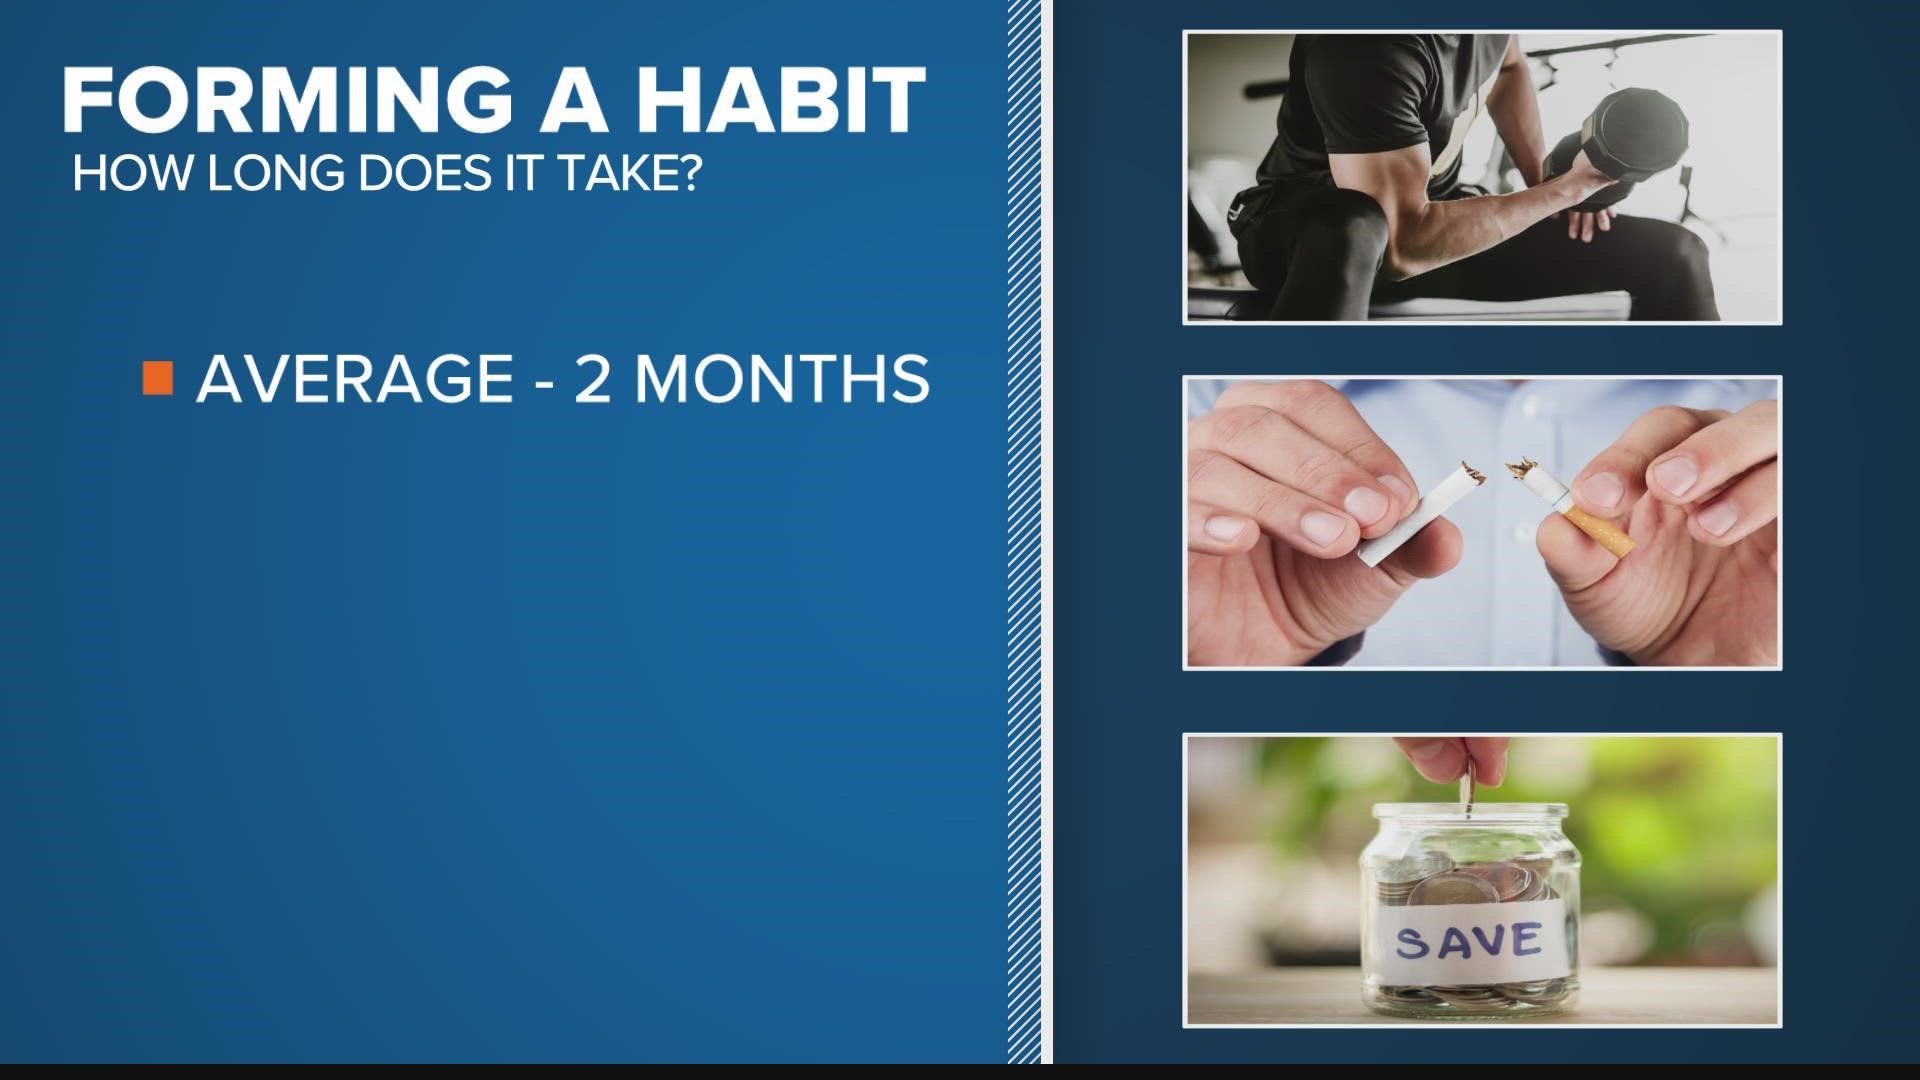 Have you stuck with your New Year's resolution? If not, it may take more time to build a habit than you think.